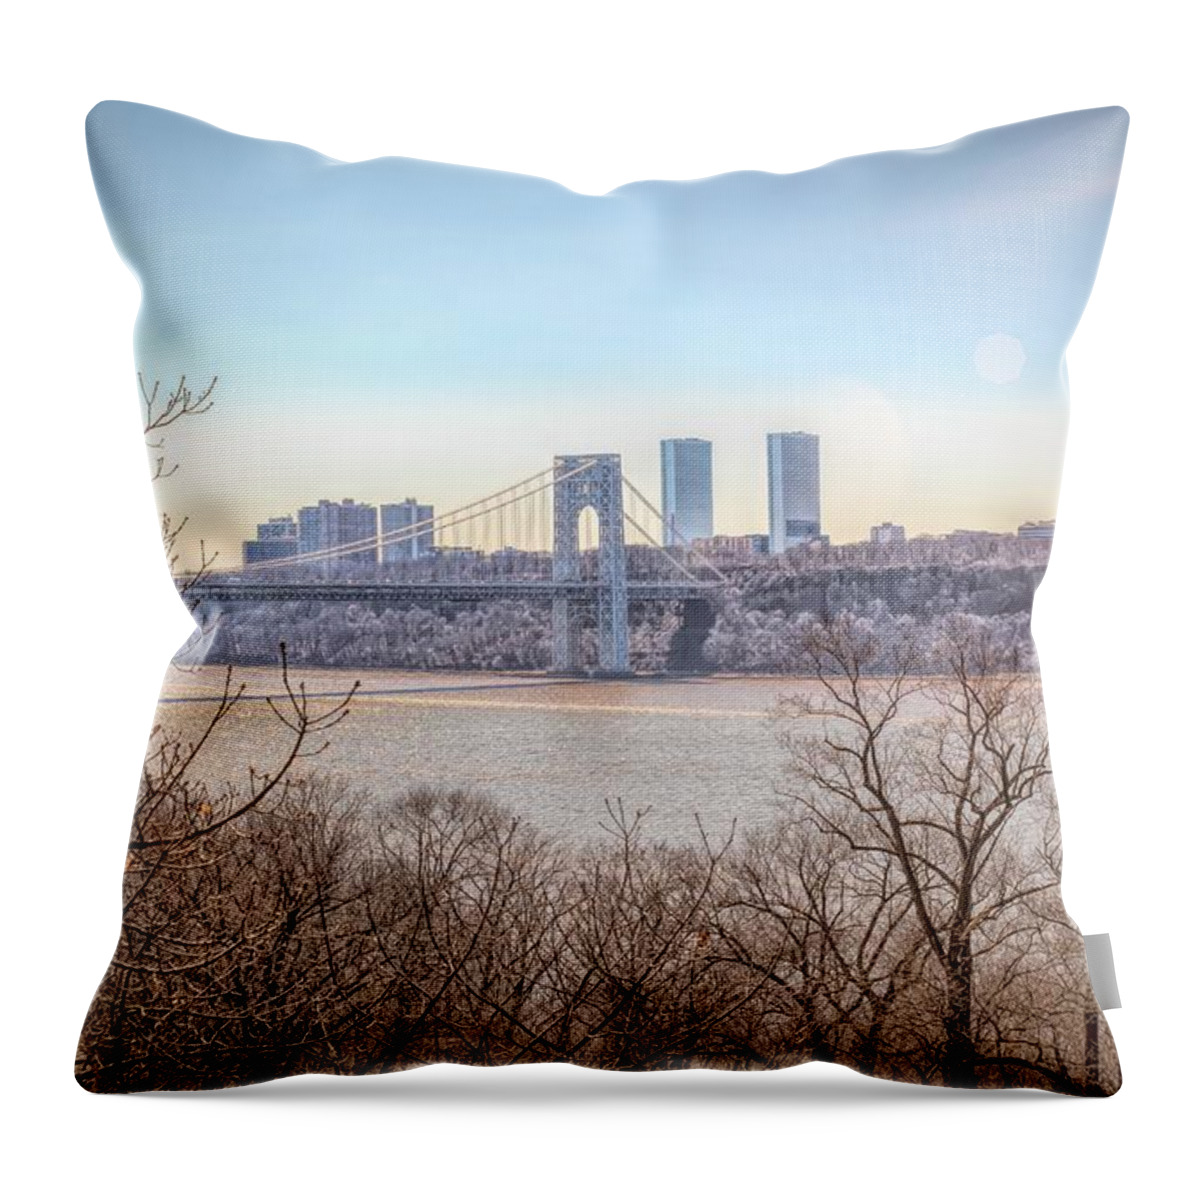 George Washington Bridge Throw Pillow featuring the photograph The GWB by Alison Frank